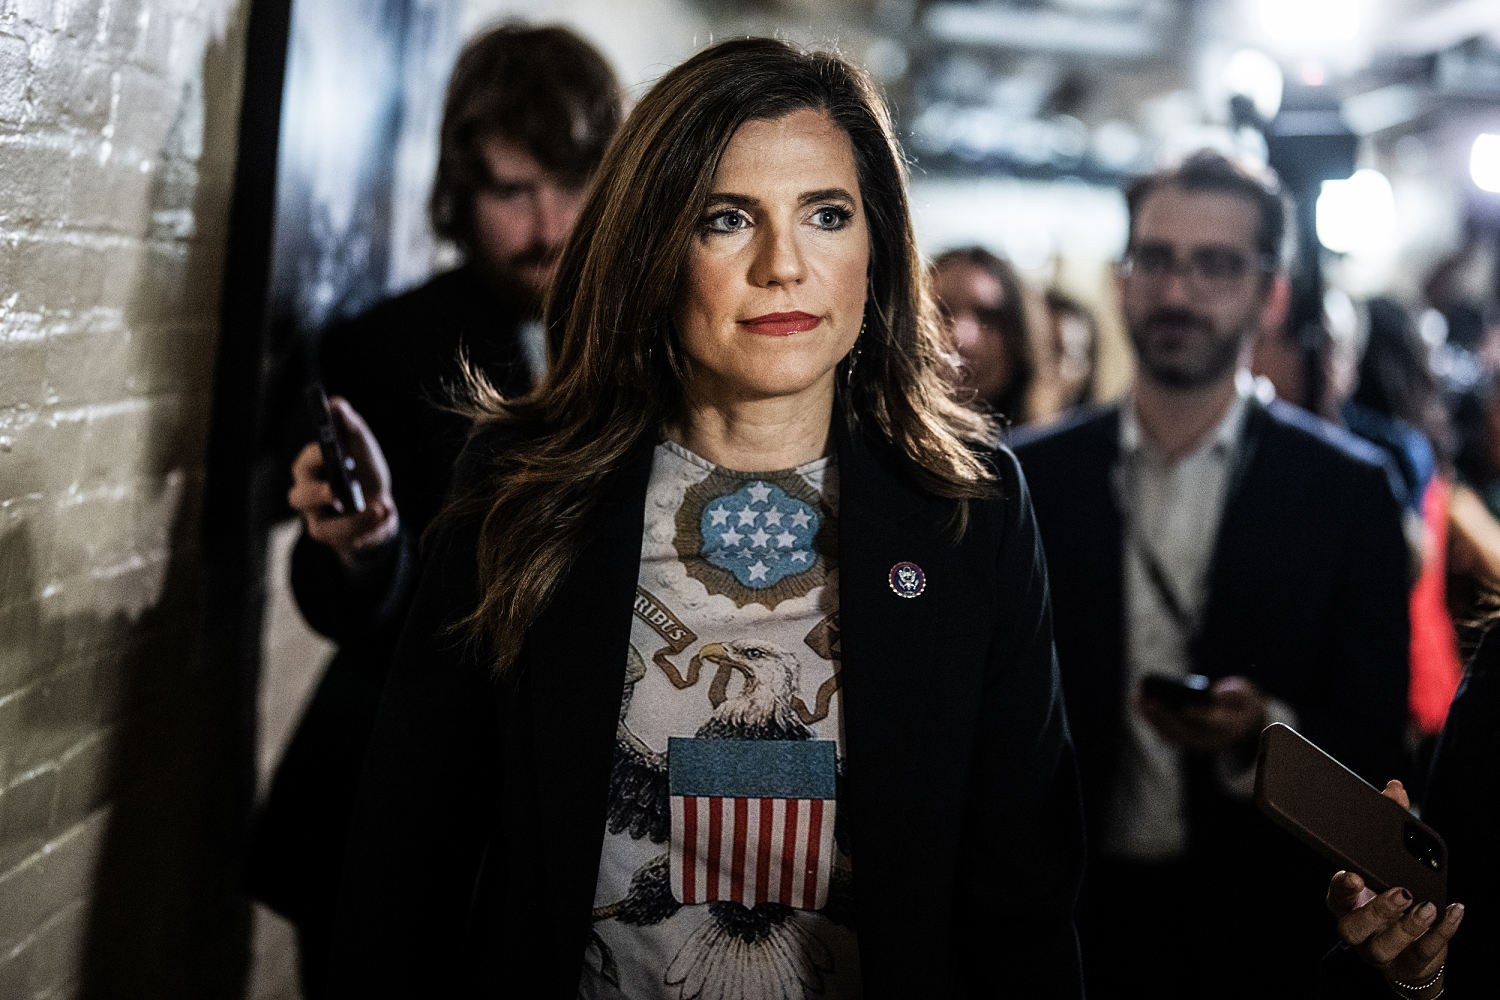 Nancy Mace stays close to Trump ahead of tough primary fight